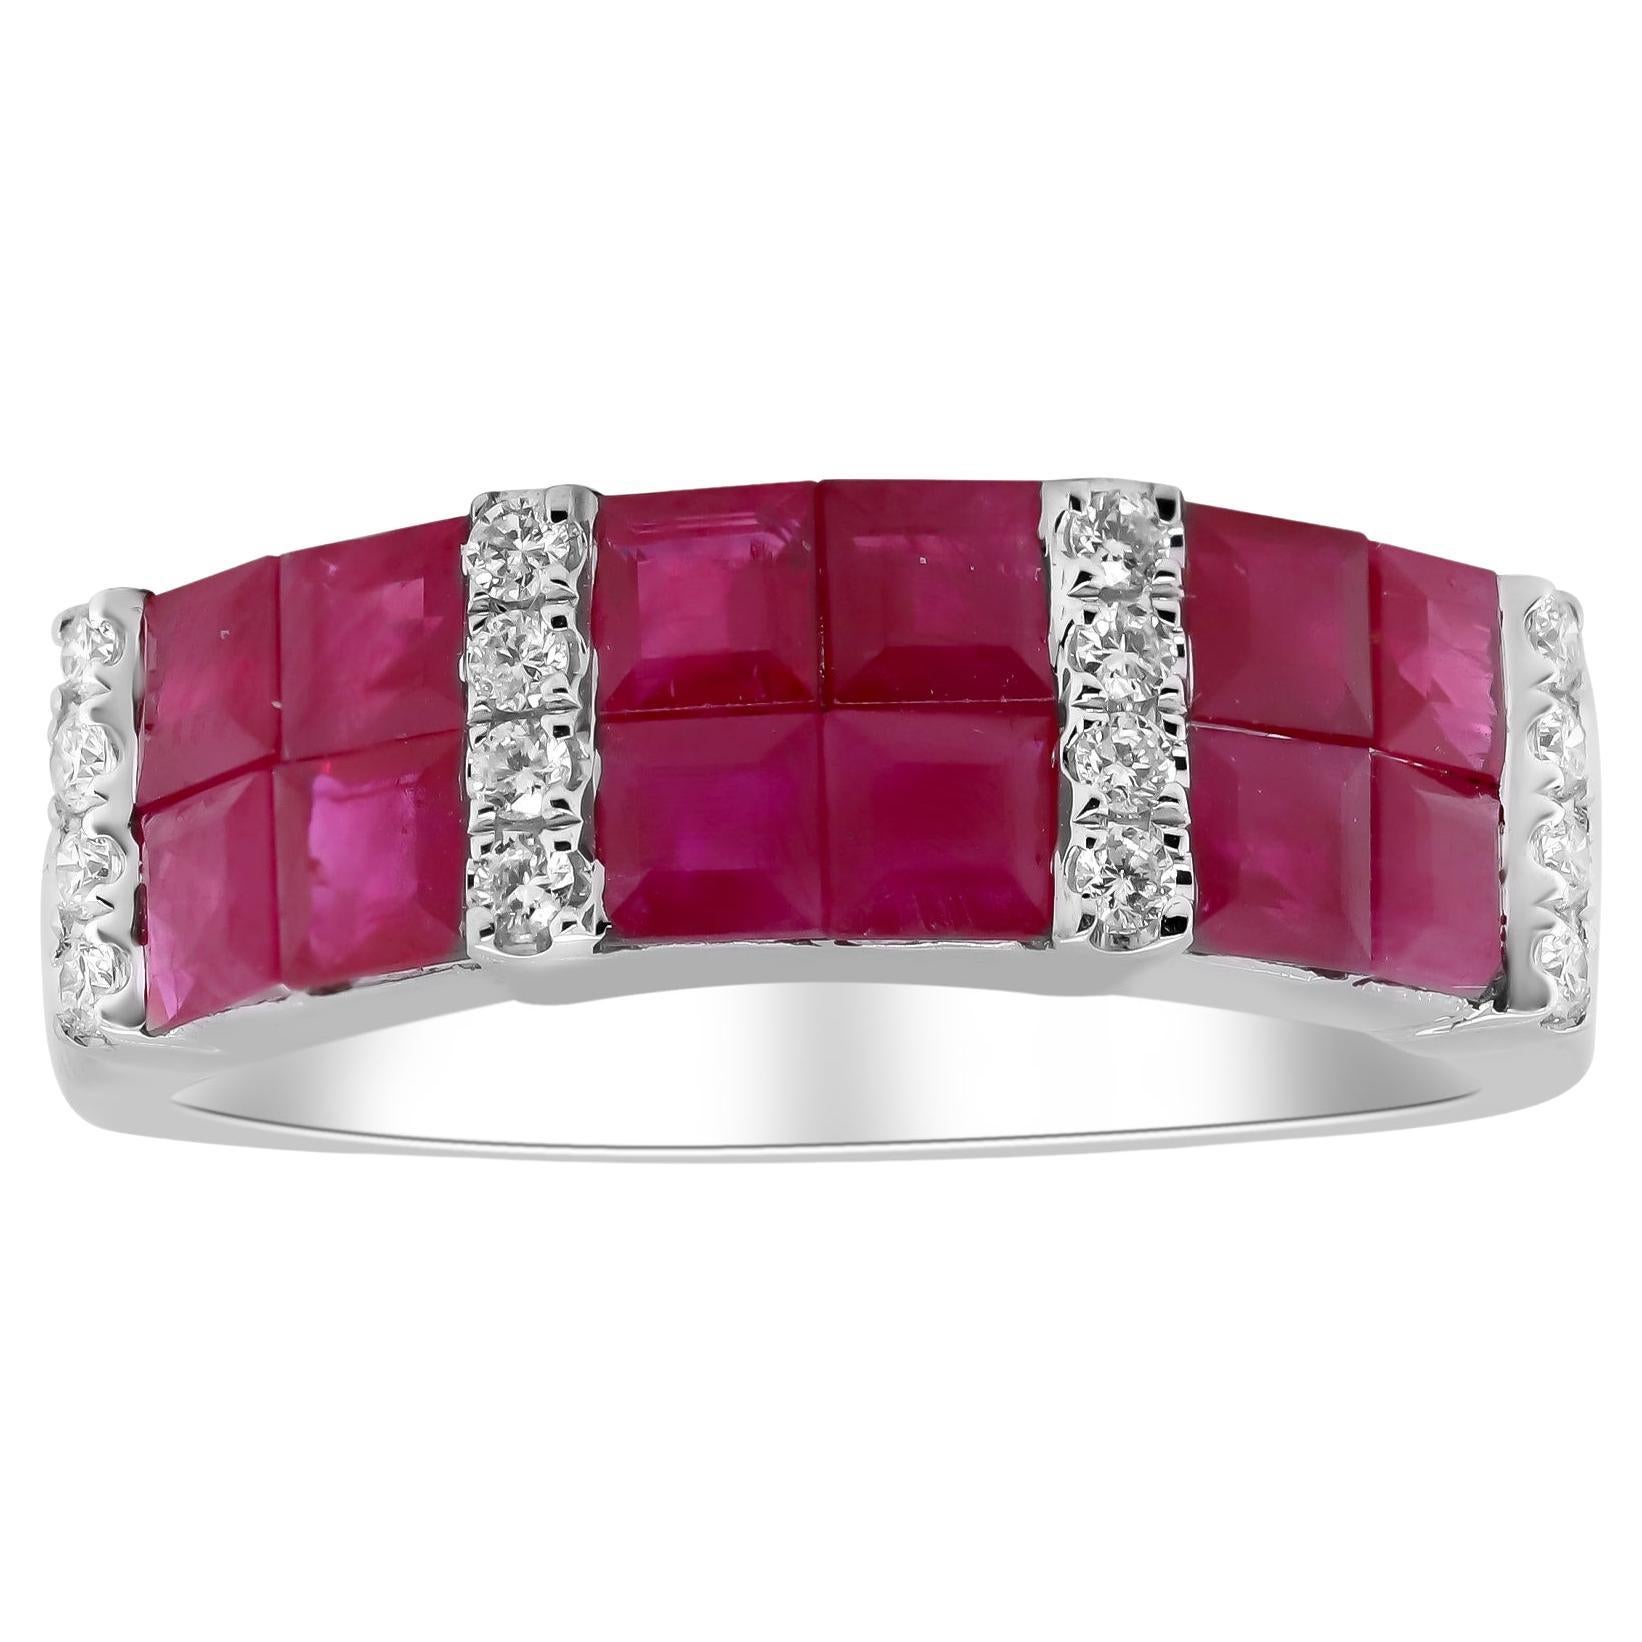 2.29 Carat Square-Cut Ruby with Diamond Accents 18K White Gold Ring For Sale